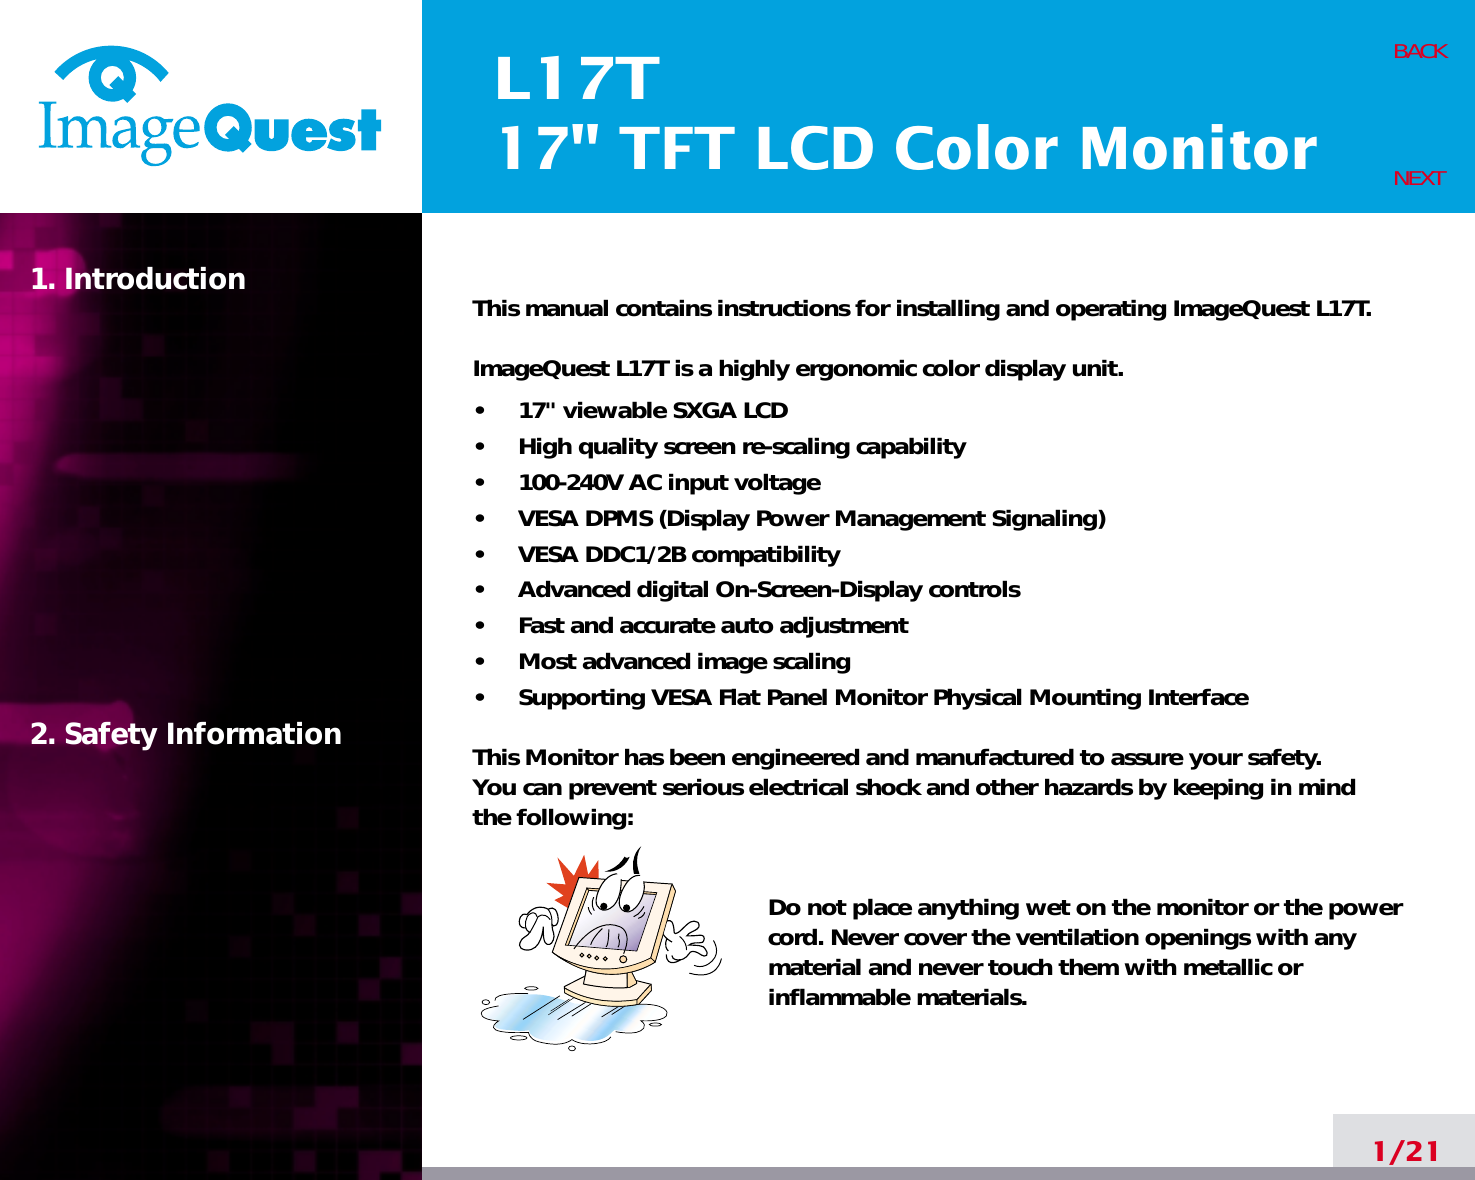 L17T17&quot; TFT LCD Color Monitor1. Introduction2. Safety Information1/21BACKNEXTThis manual contains instructions for installing and operating ImageQuest L17T.ImageQuest L17T is a highly ergonomic color display unit.•     17&quot; viewable SXGA LCD•     High quality screen re-scaling capability•     100-240V AC input voltage•     VESA DPMS (Display Power Management Signaling)•     VESA DDC1/2B compatibility•     Advanced digital On-Screen-Display controls•     Fast and accurate auto adjustment  •     Most advanced image scaling•     Supporting VESA Flat Panel Monitor Physical Mounting InterfaceThis Monitor has been engineered and manufactured to assure your safety. You can prevent serious electrical shock and other hazards by keeping in mind the following:Do not place anything wet on the monitor or the powercord. Never cover the ventilation openings with anymaterial and never touch them with metallic or inflammable materials.